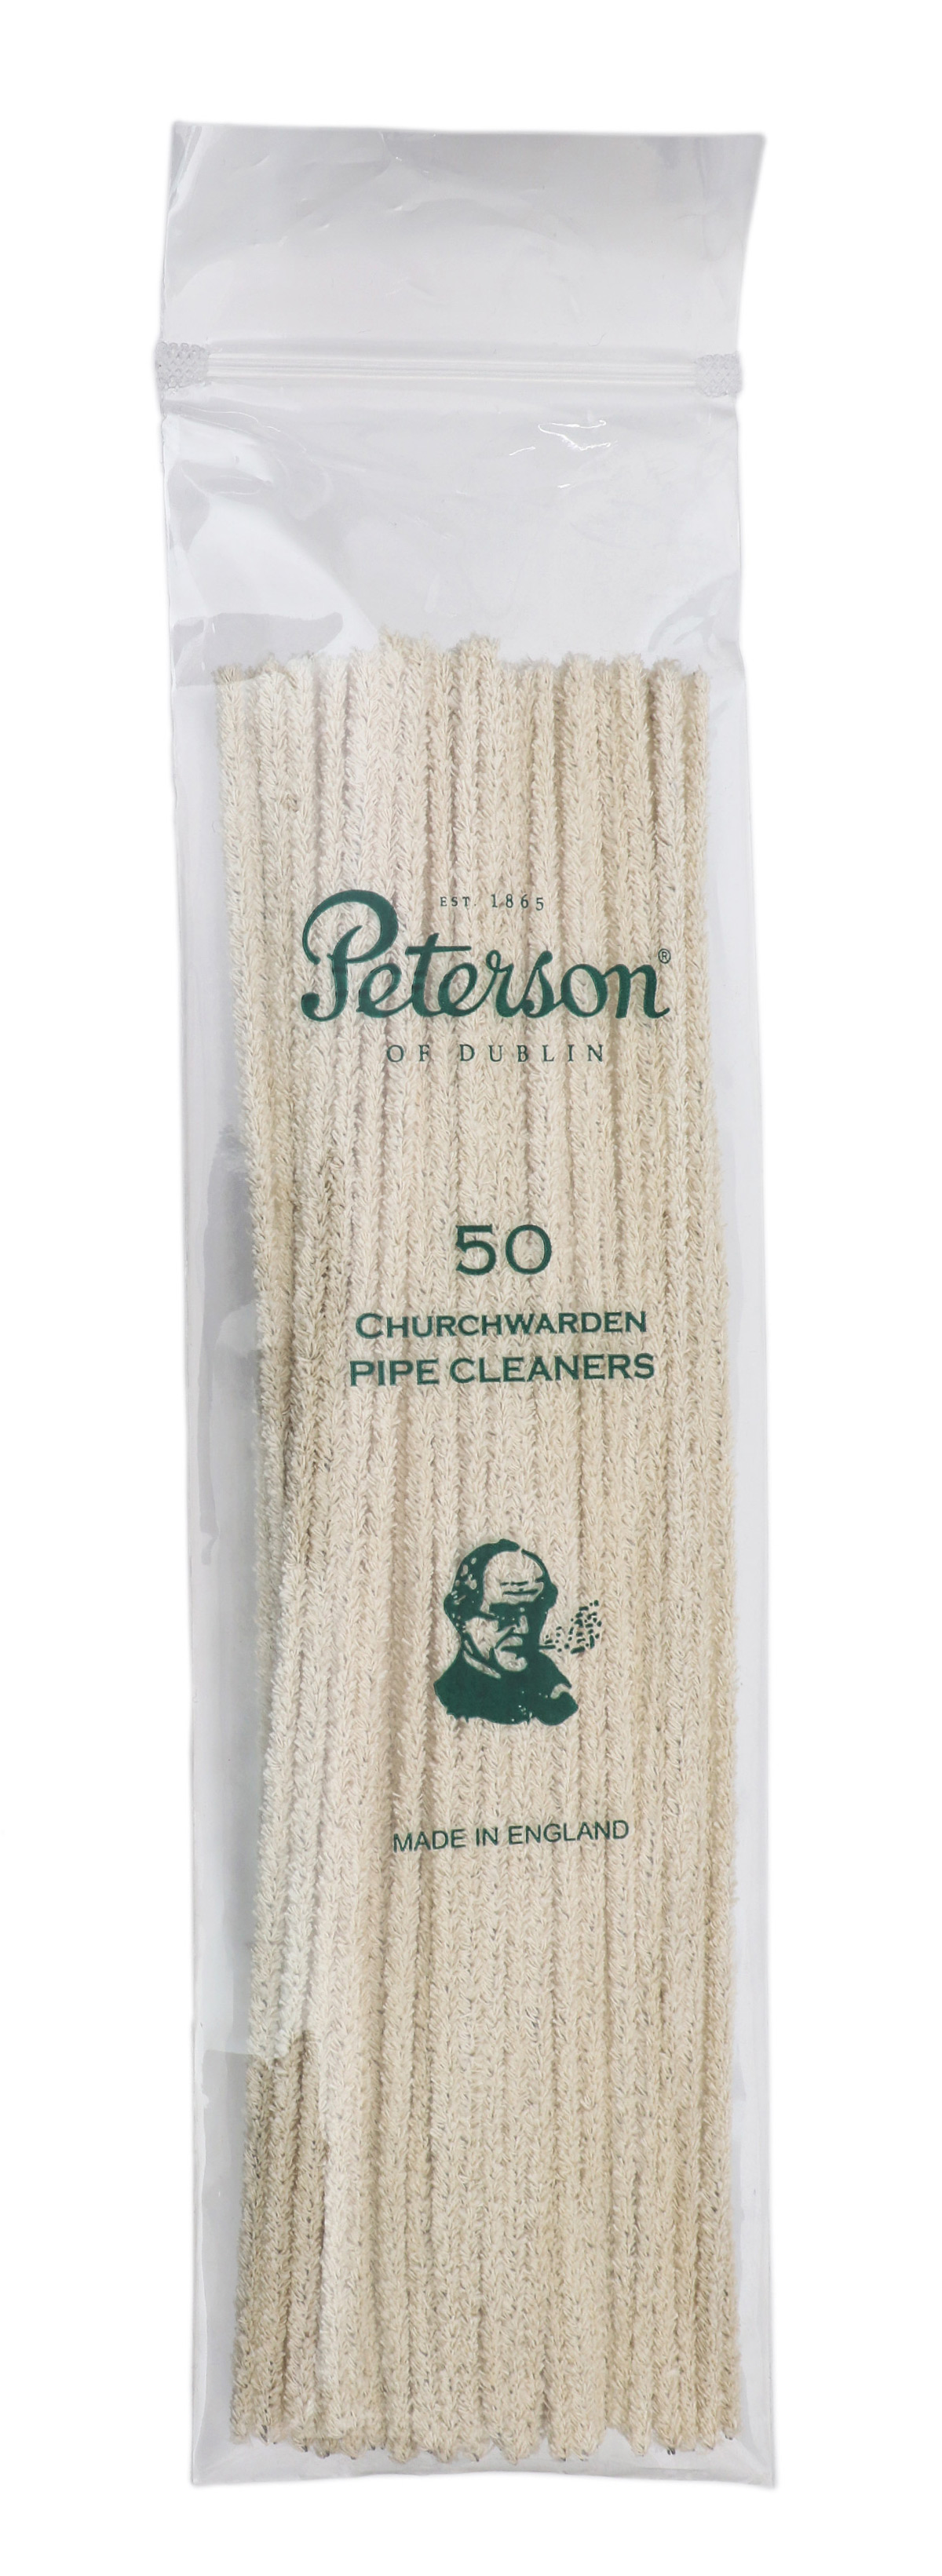 Pipe Tools & Supplies Peterson Churchwarden Pipe Cleaners (50 Pack)